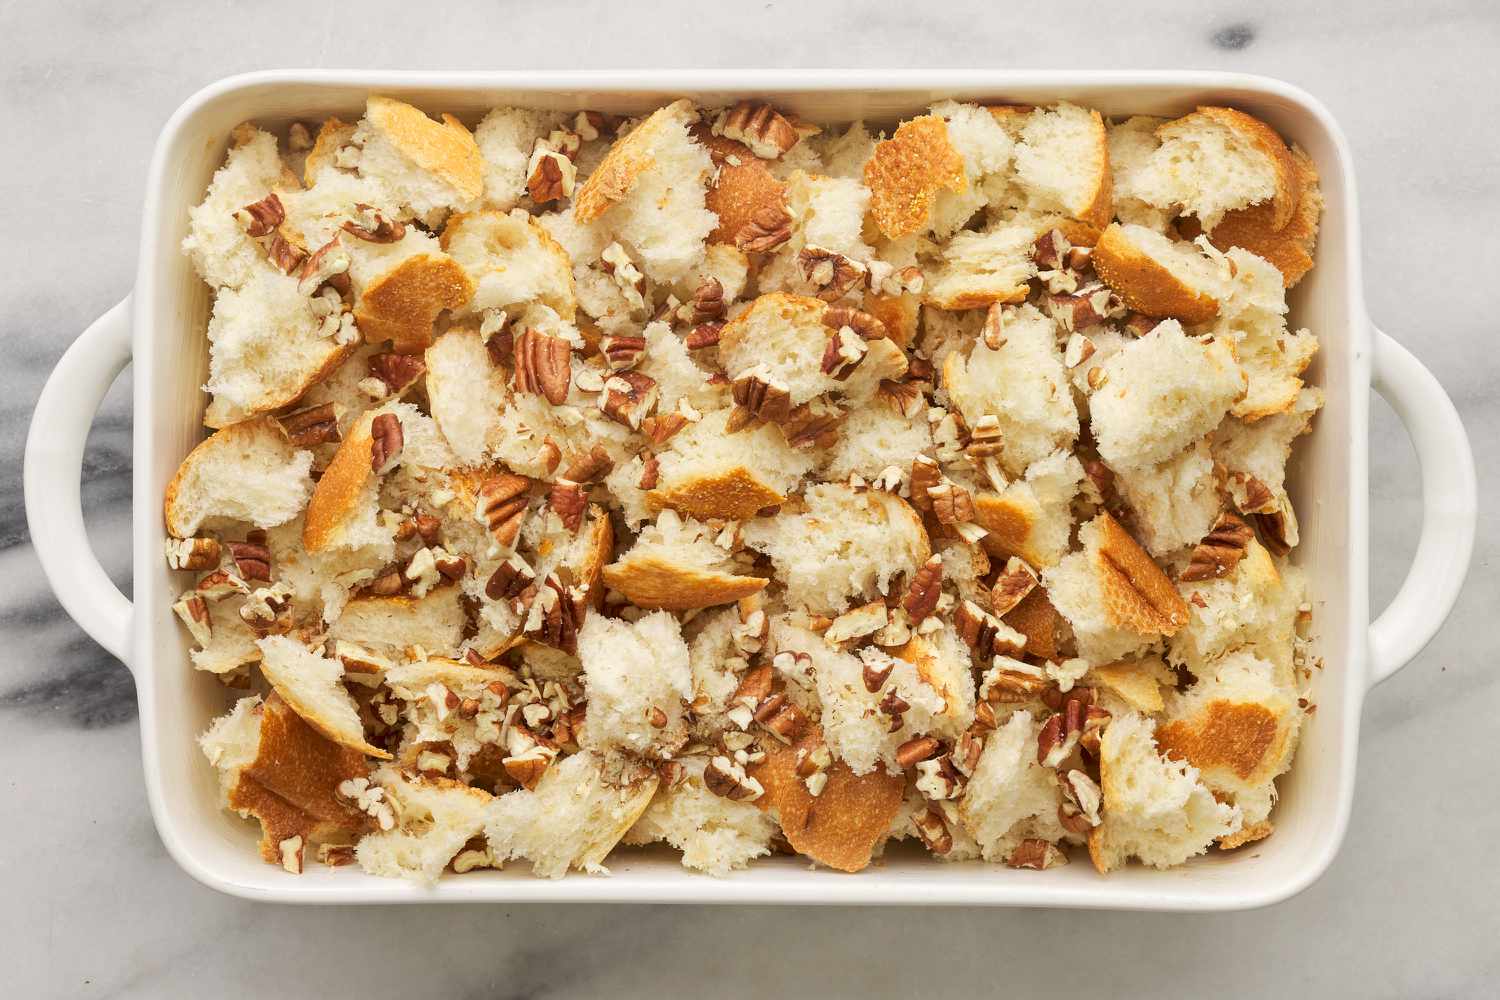 bread cubes and pecans inside of buttered casserole dish